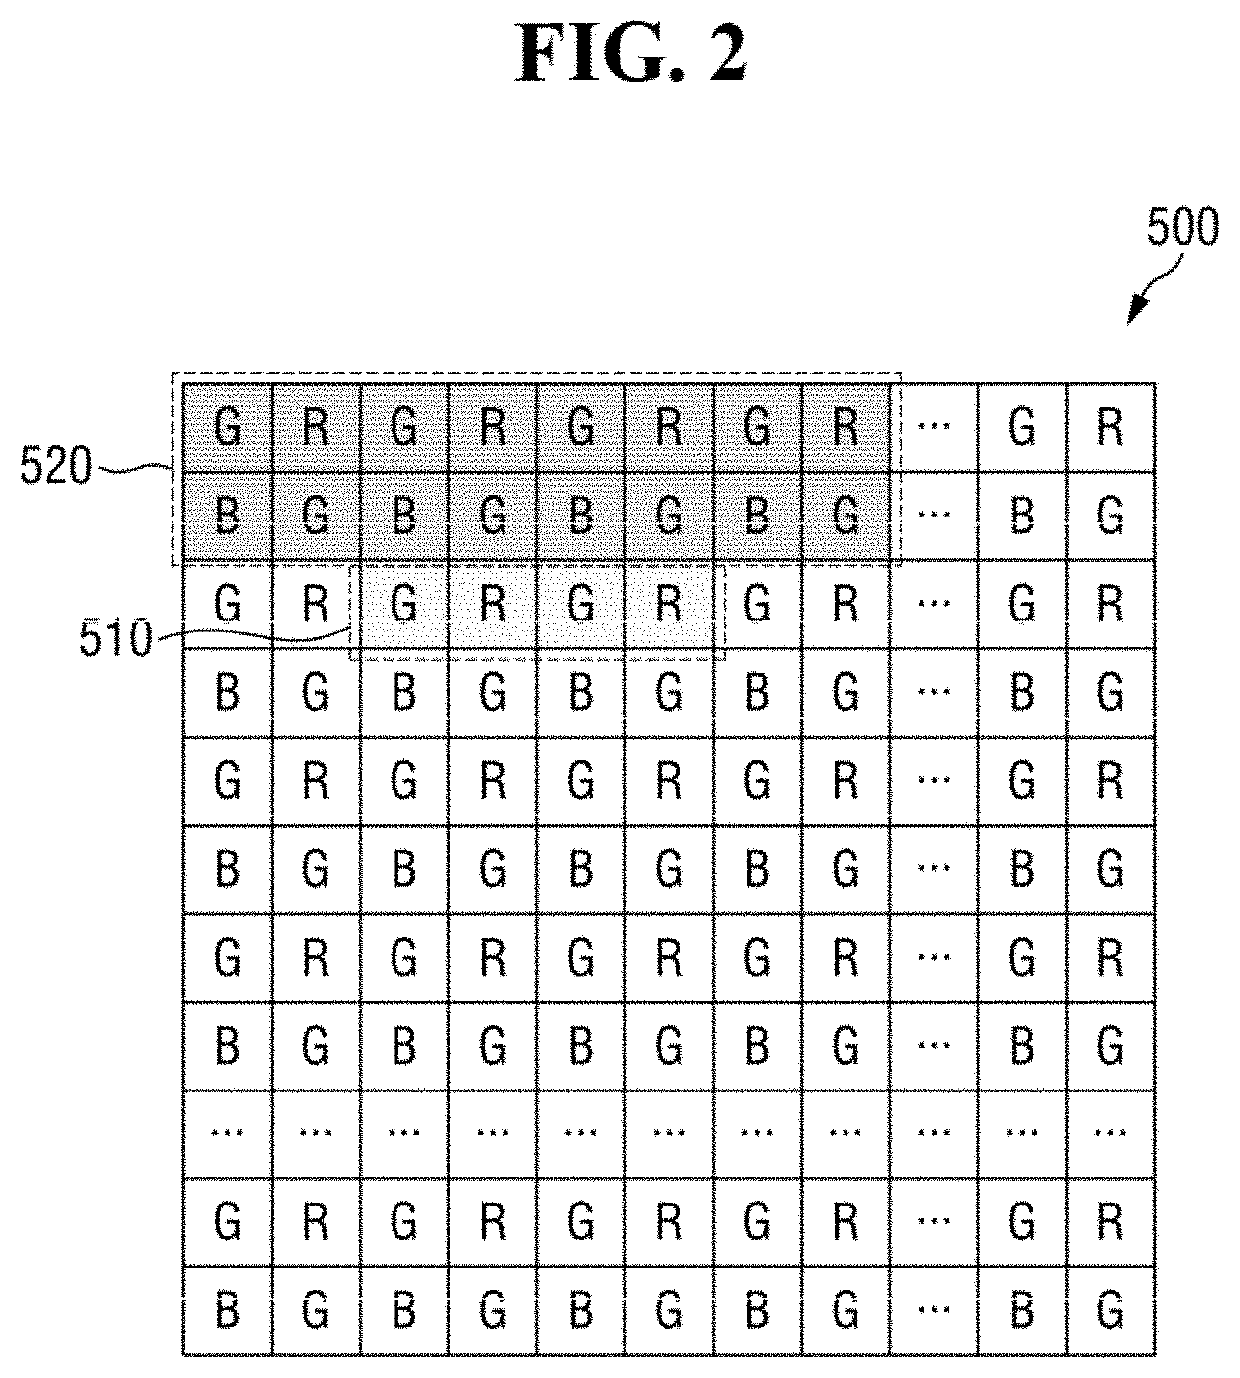 Image encoder, an image sensing device, and an operating method of the image encoder